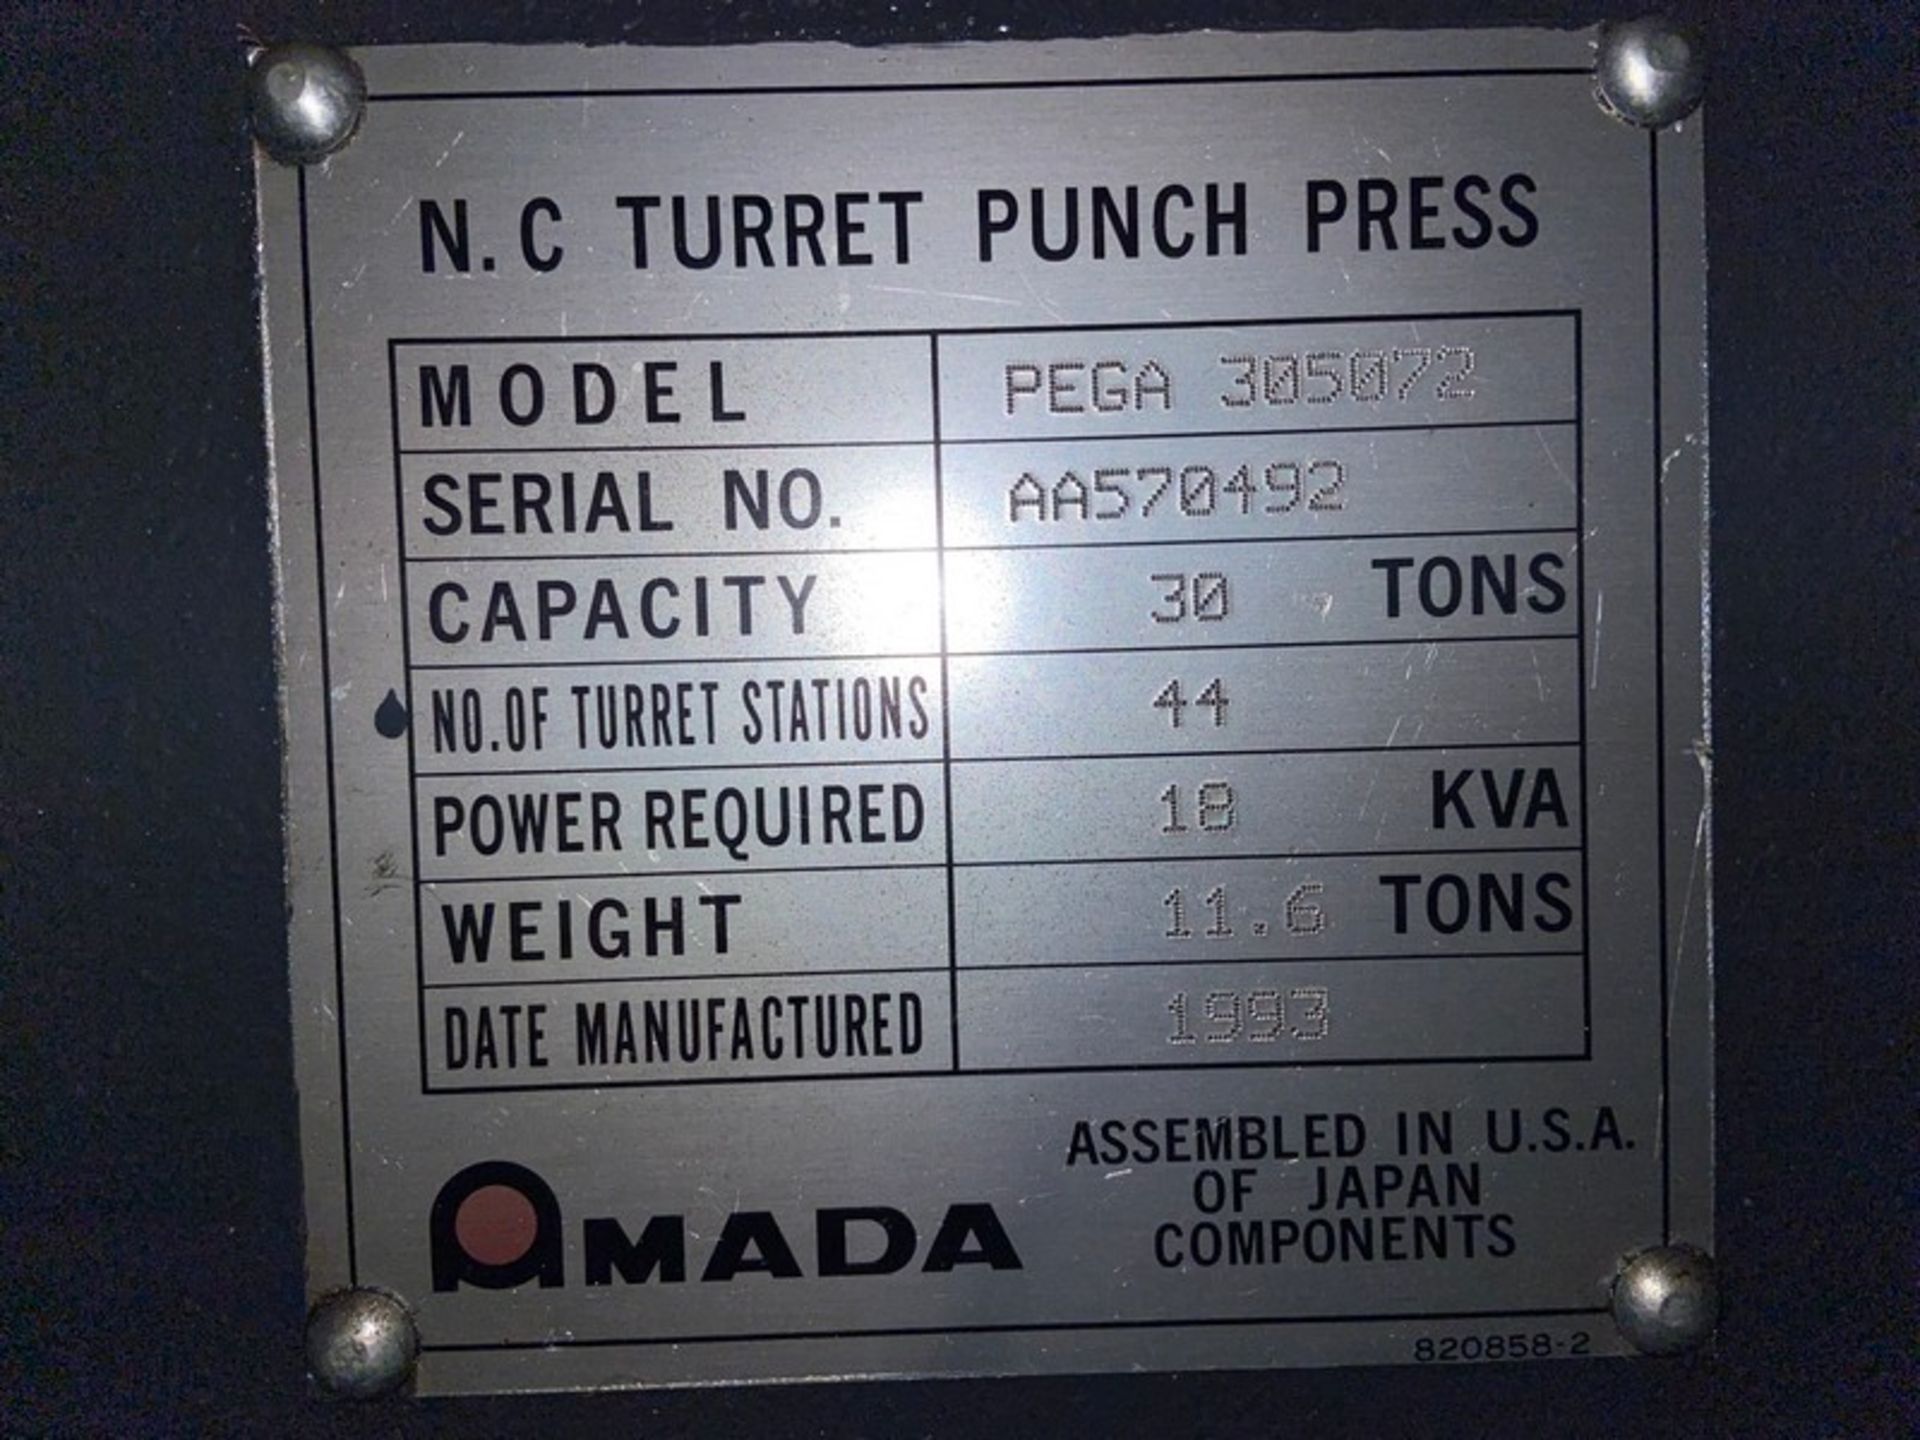 Amada Pega 357 30 Ton CNC Turret Punch, S/N AA570492, Weight 11.6, Year of Manufacture: - Image 10 of 21